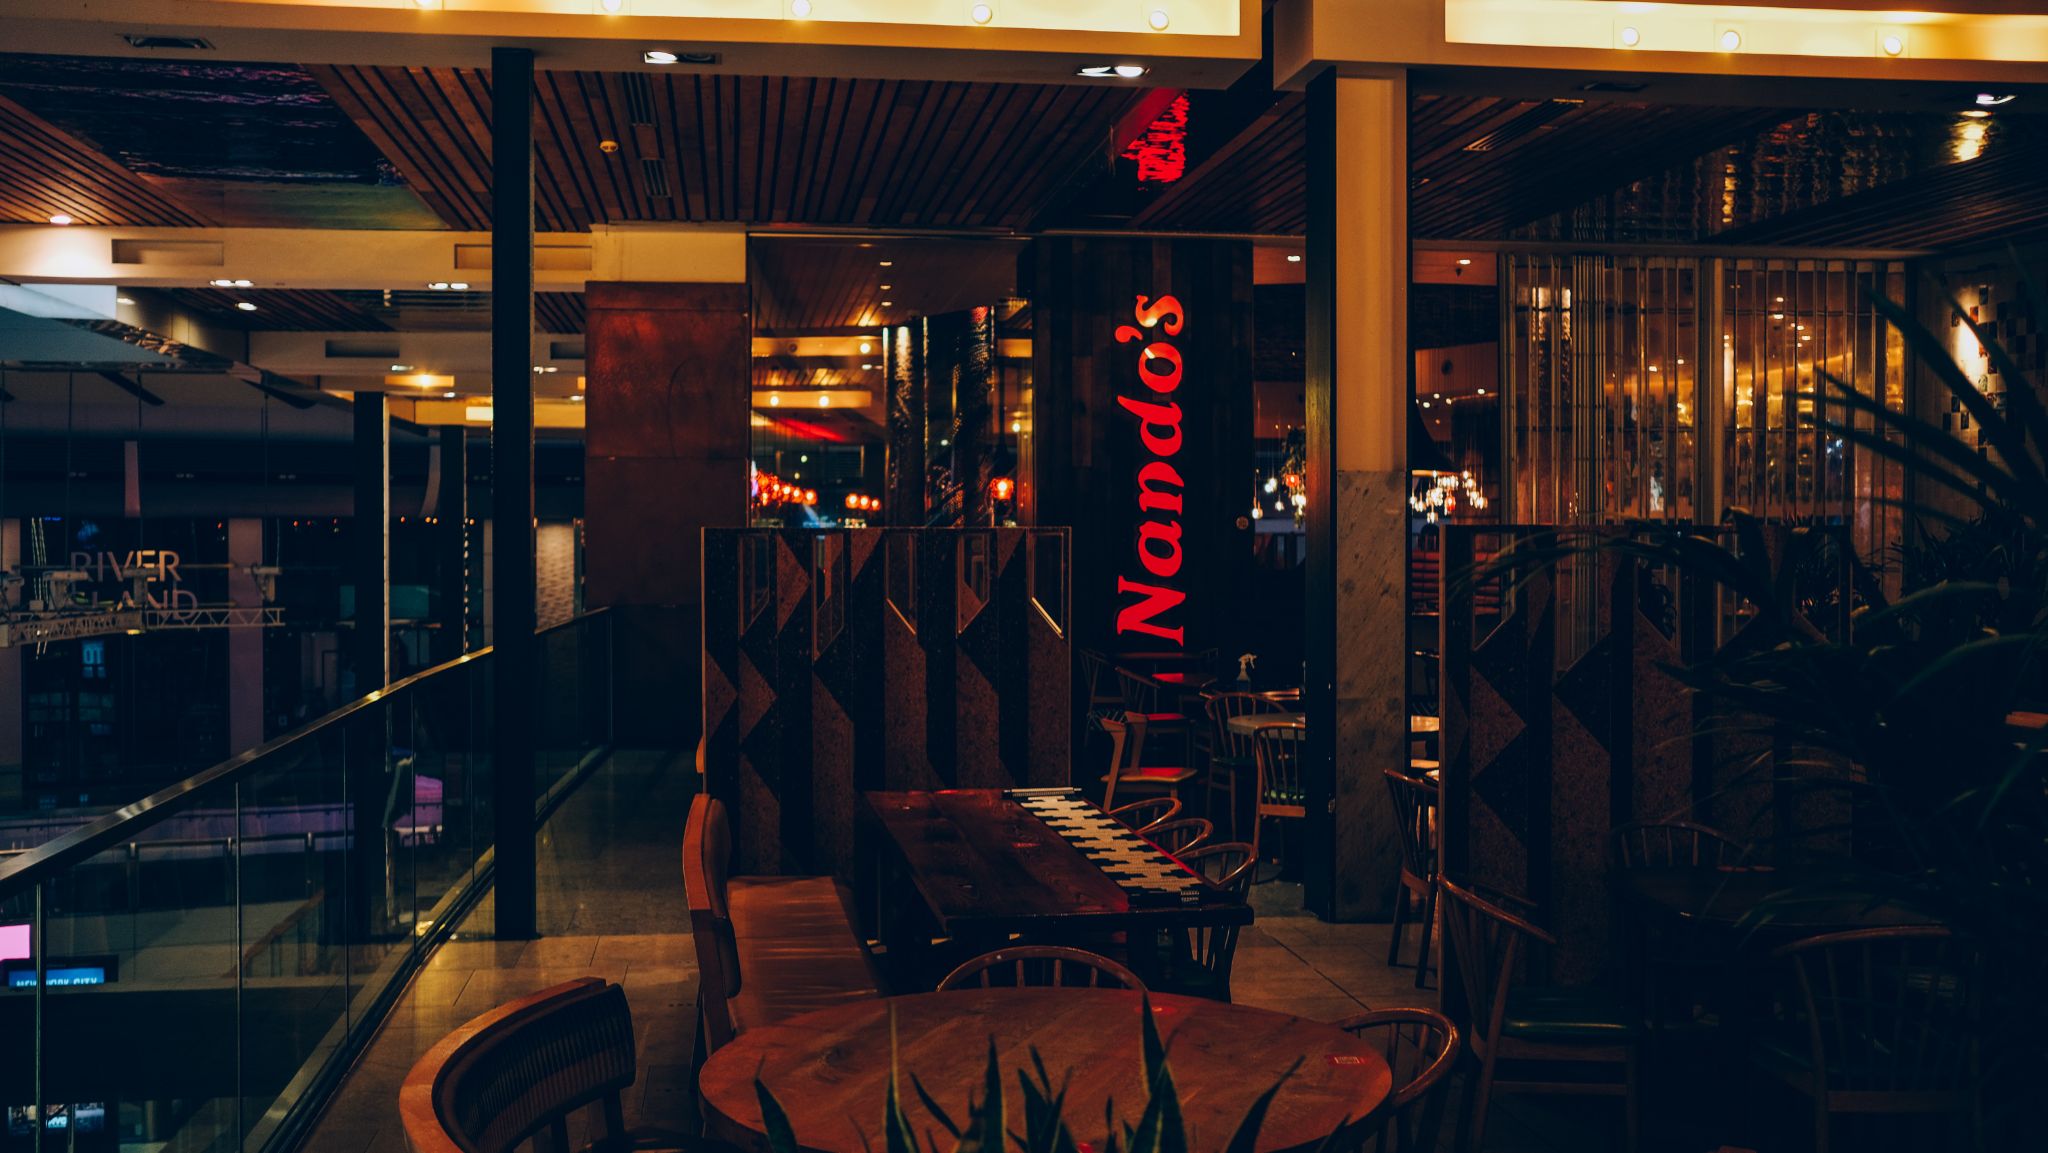 Swansea is home to the UK’s highest-rated Nando’s restaurants according to a new survey.